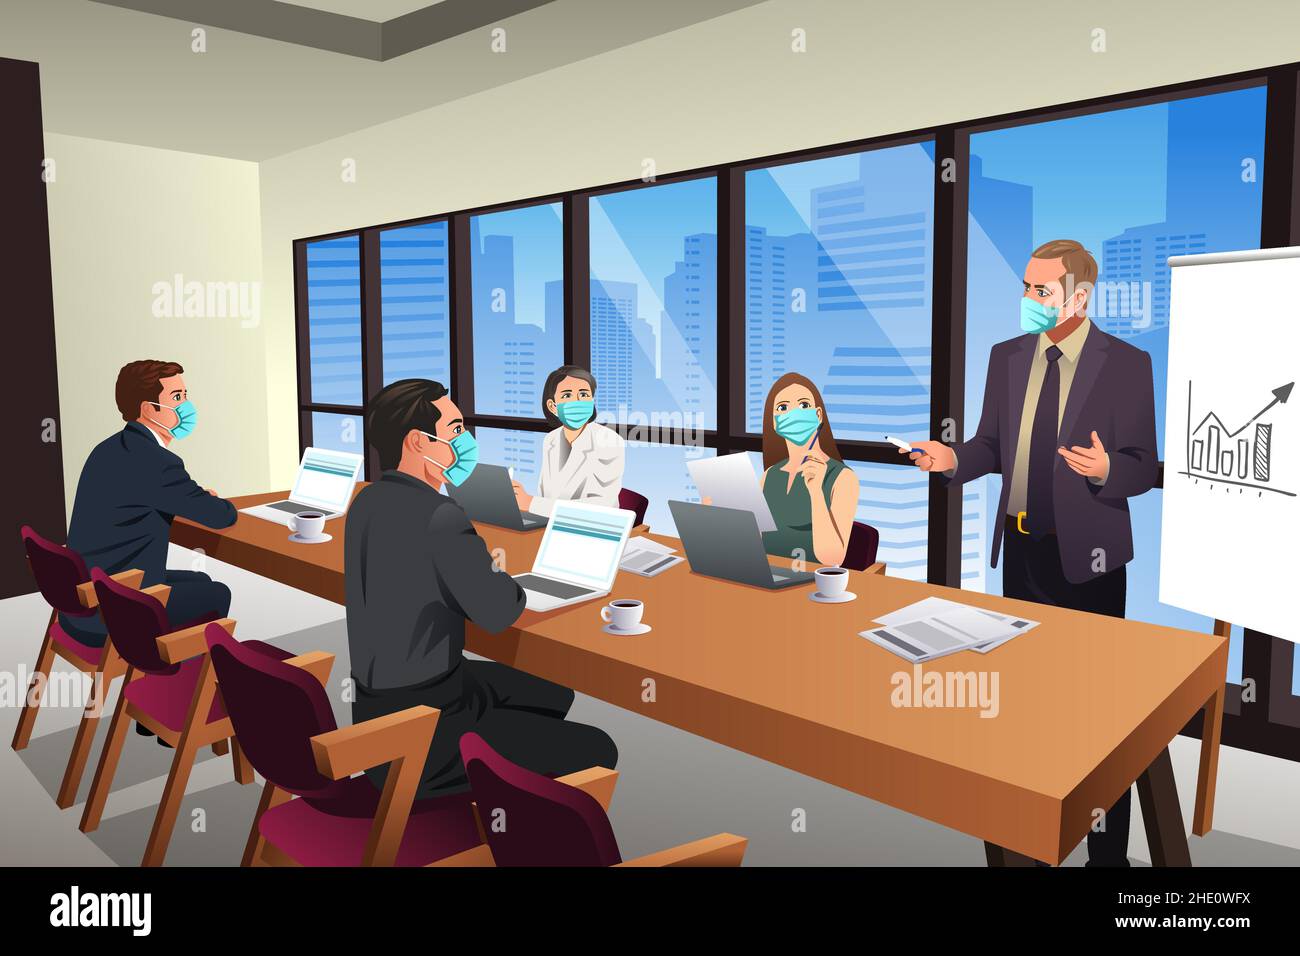 A vector illustration of Business People Meeting in an Office Wearing Mask Stock Vector